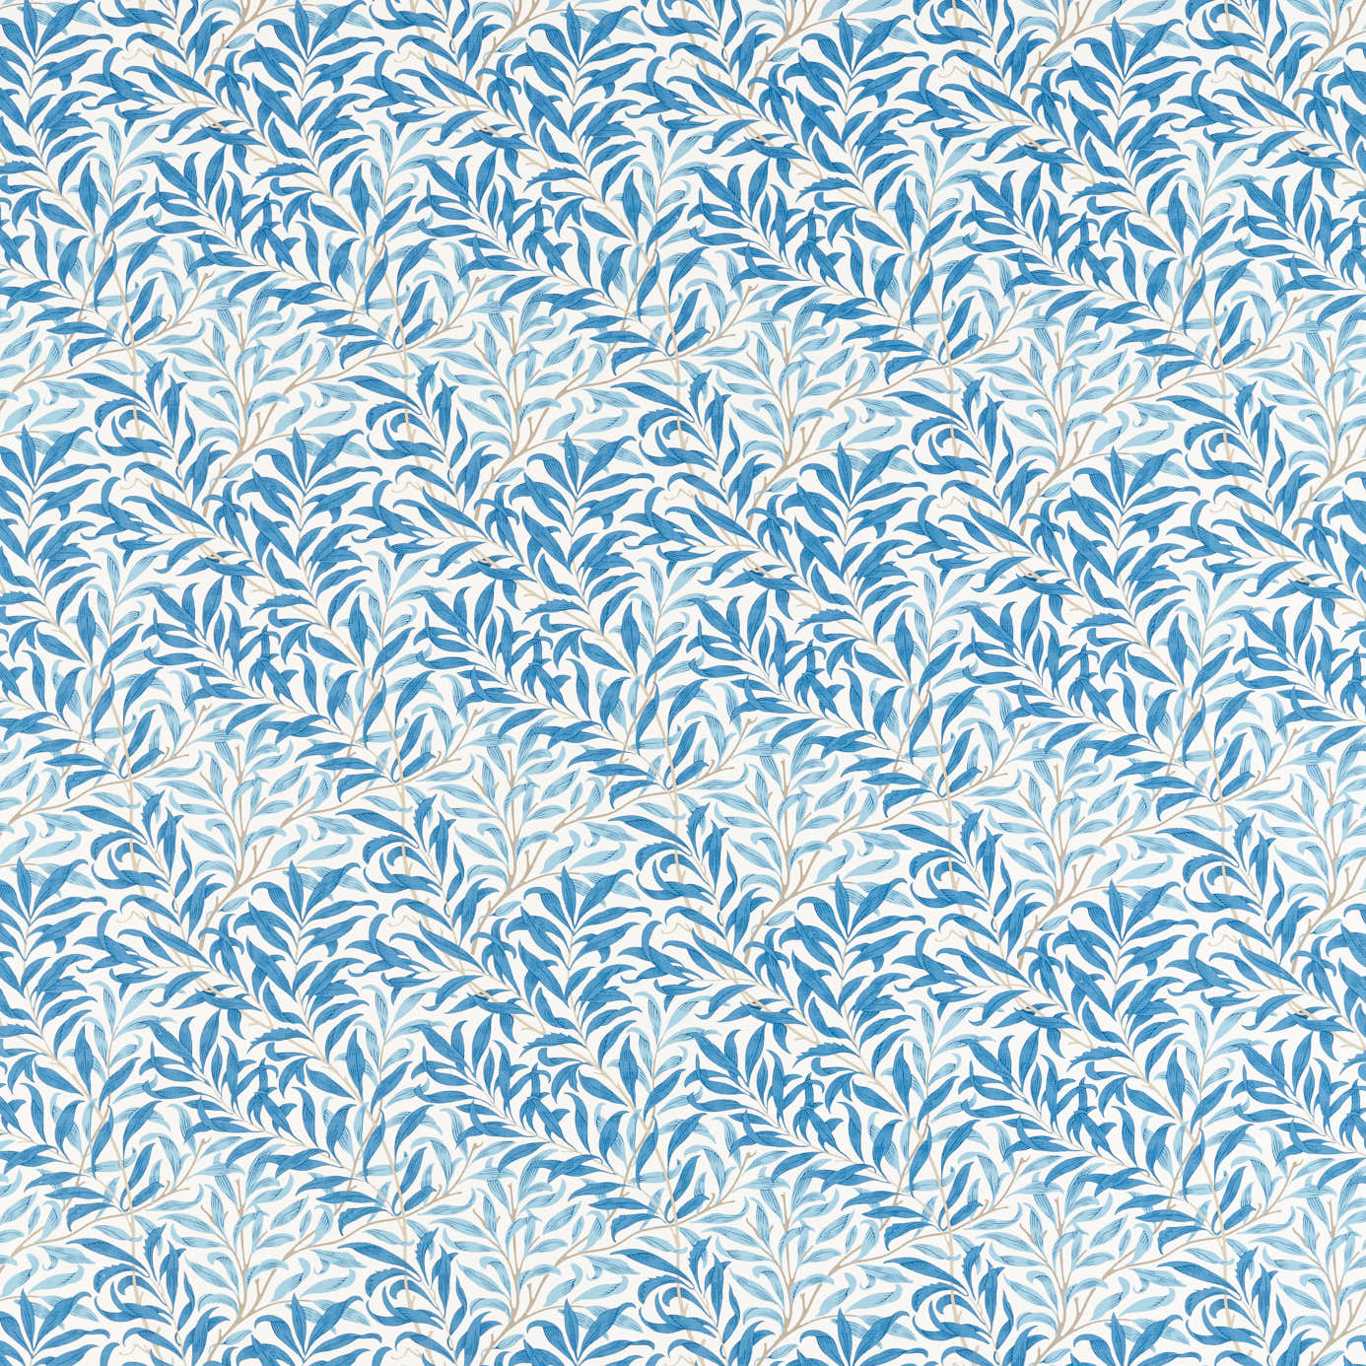 Willow Boughs Woad Fabric by MOR